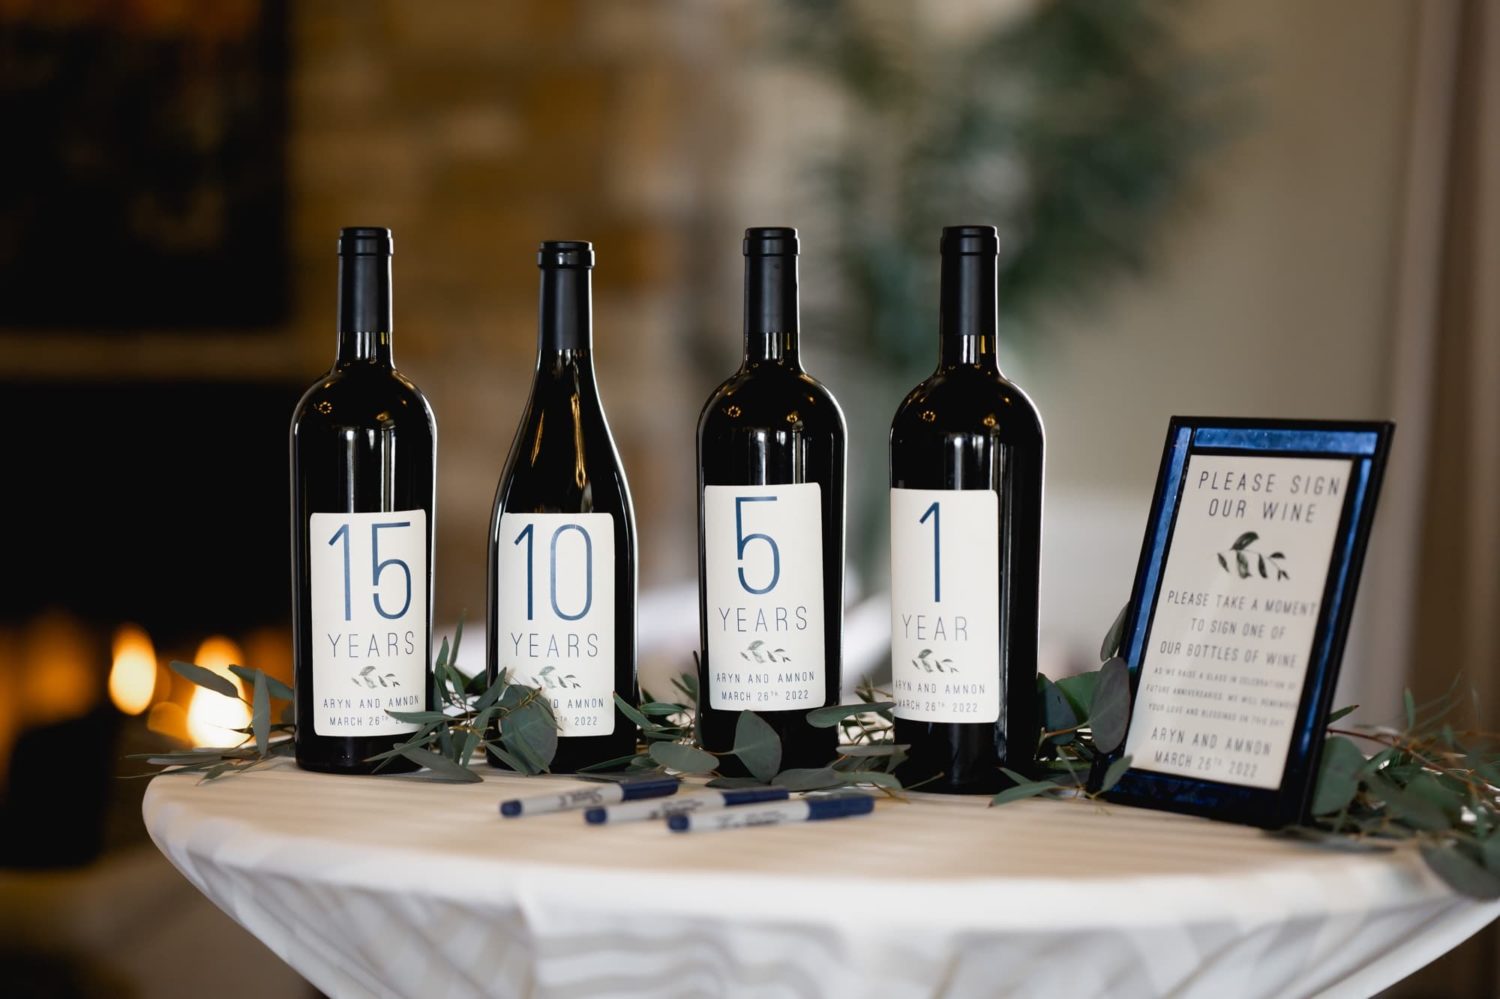 Anniversary wine bottles for guests to sign at a wedding